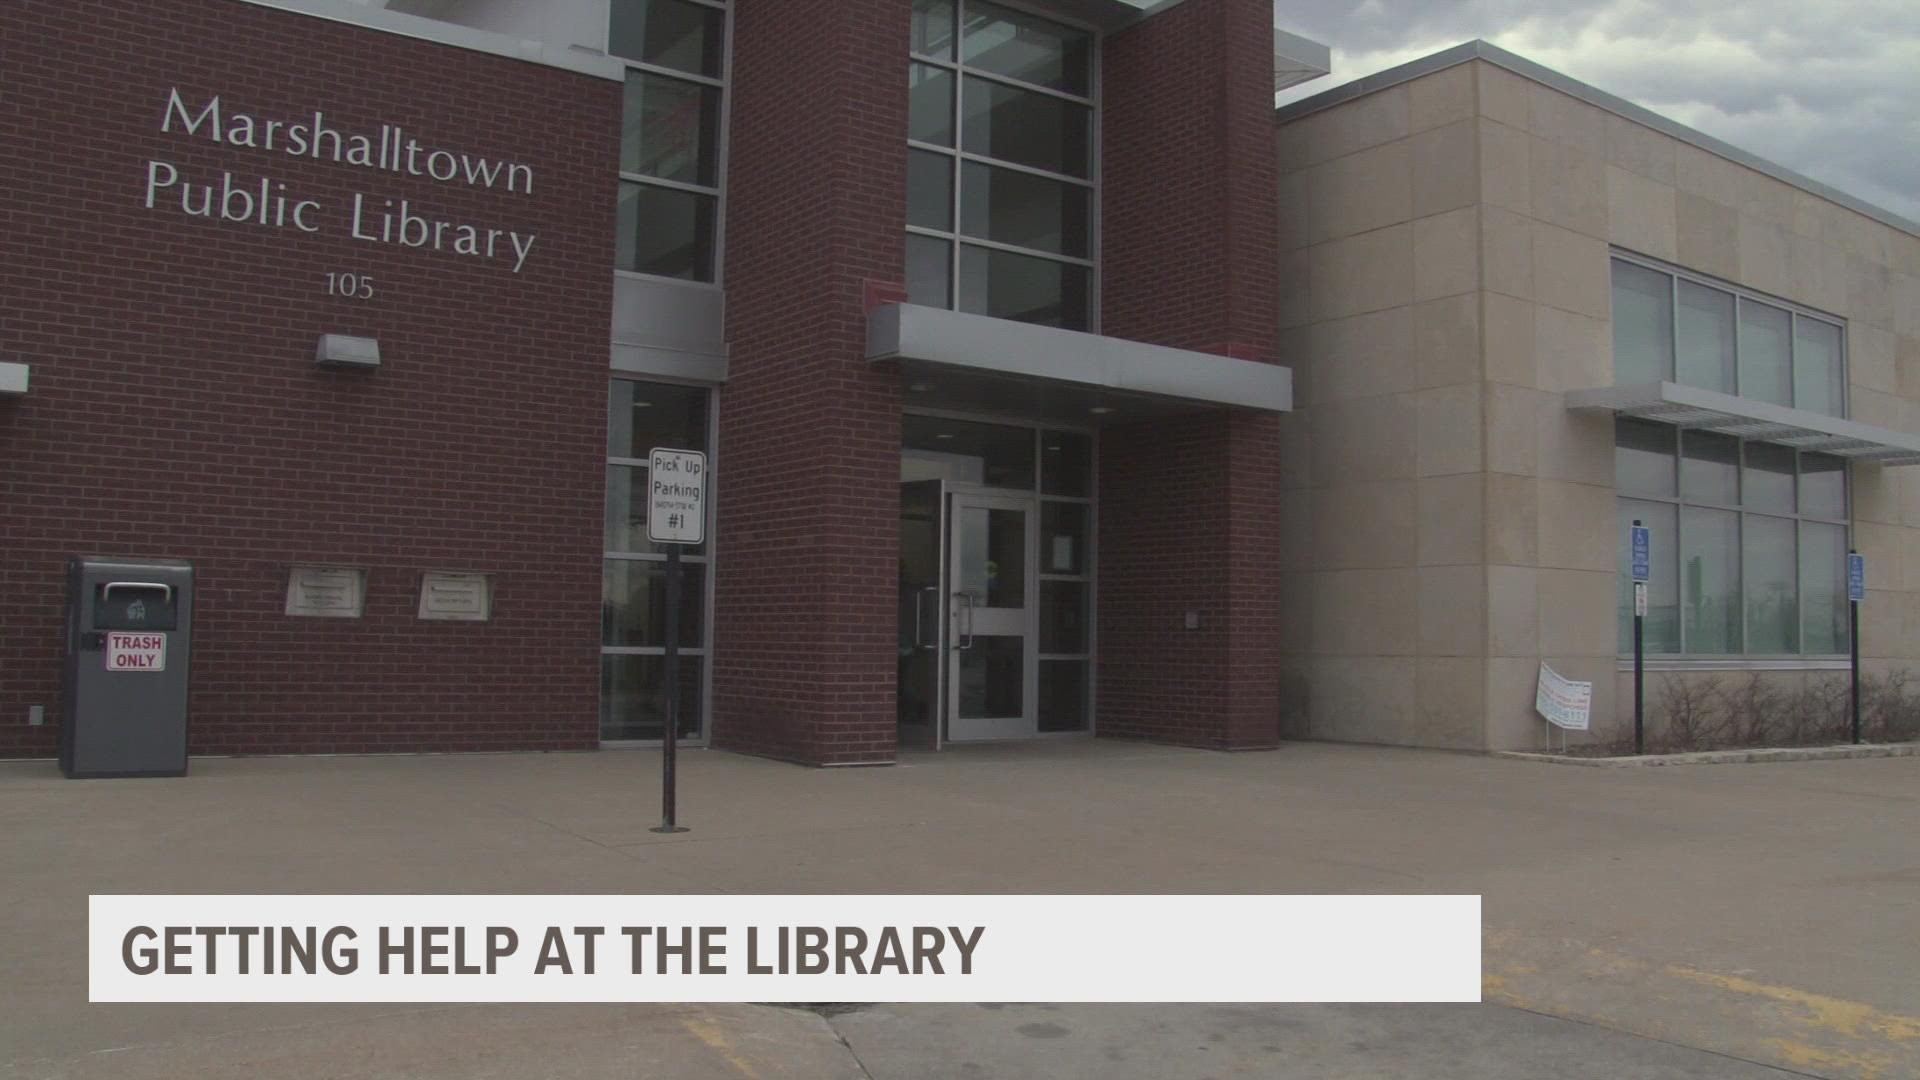 Marshalltown library has a new program where a social worker is stationed at the library and helps connect people to different resources.